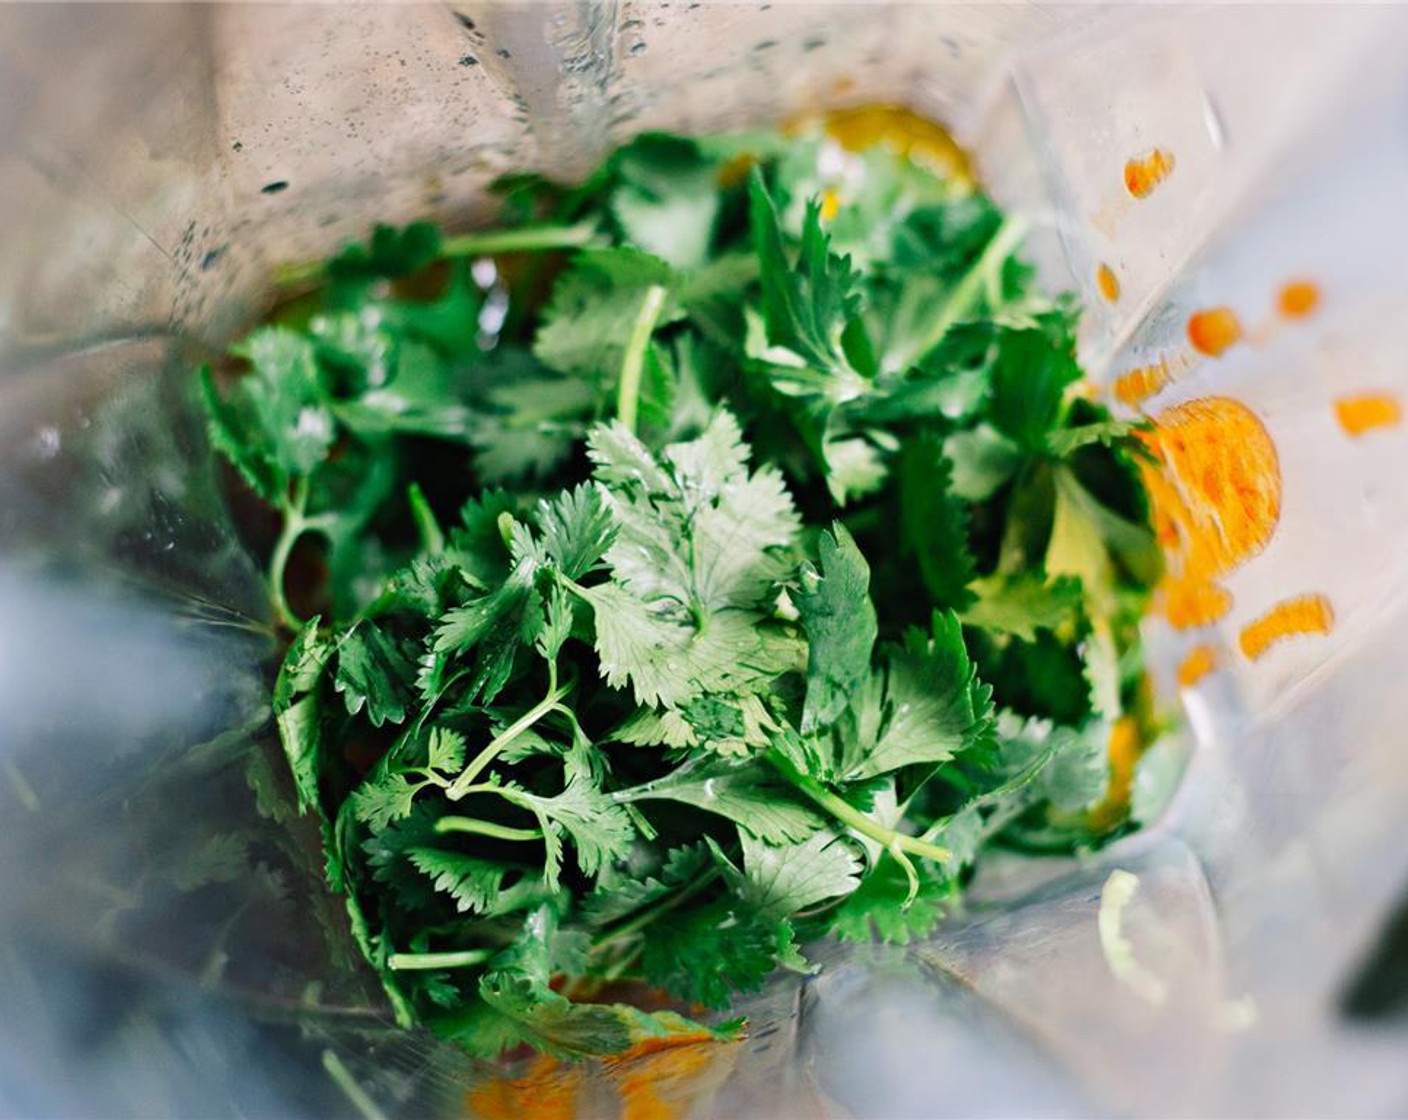 step 2 Combine the zest and juice of the lime, Olive Oil (1/2 cup), Honey (1 tsp), Chipotle Peppers in Adobo Sauce (1) (plus 1 tsp liquid from the can), Salt (1 tsp), Water (2 Tbsp), Garlic, and Fresh Cilantro (1/2 cup) in a blender or food processor.